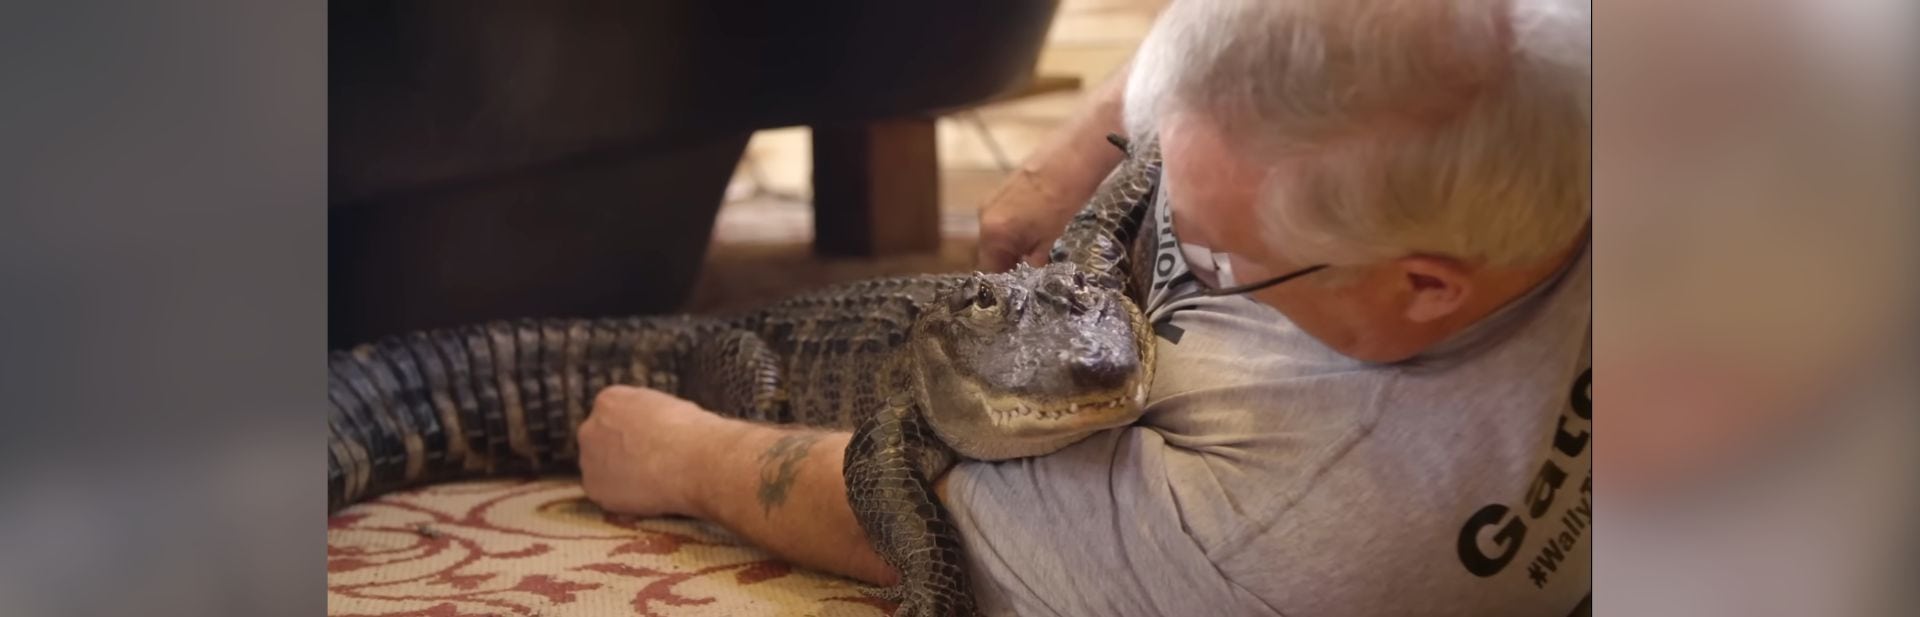 This Emotional Support Alligator is Turning Frowns Upside Down